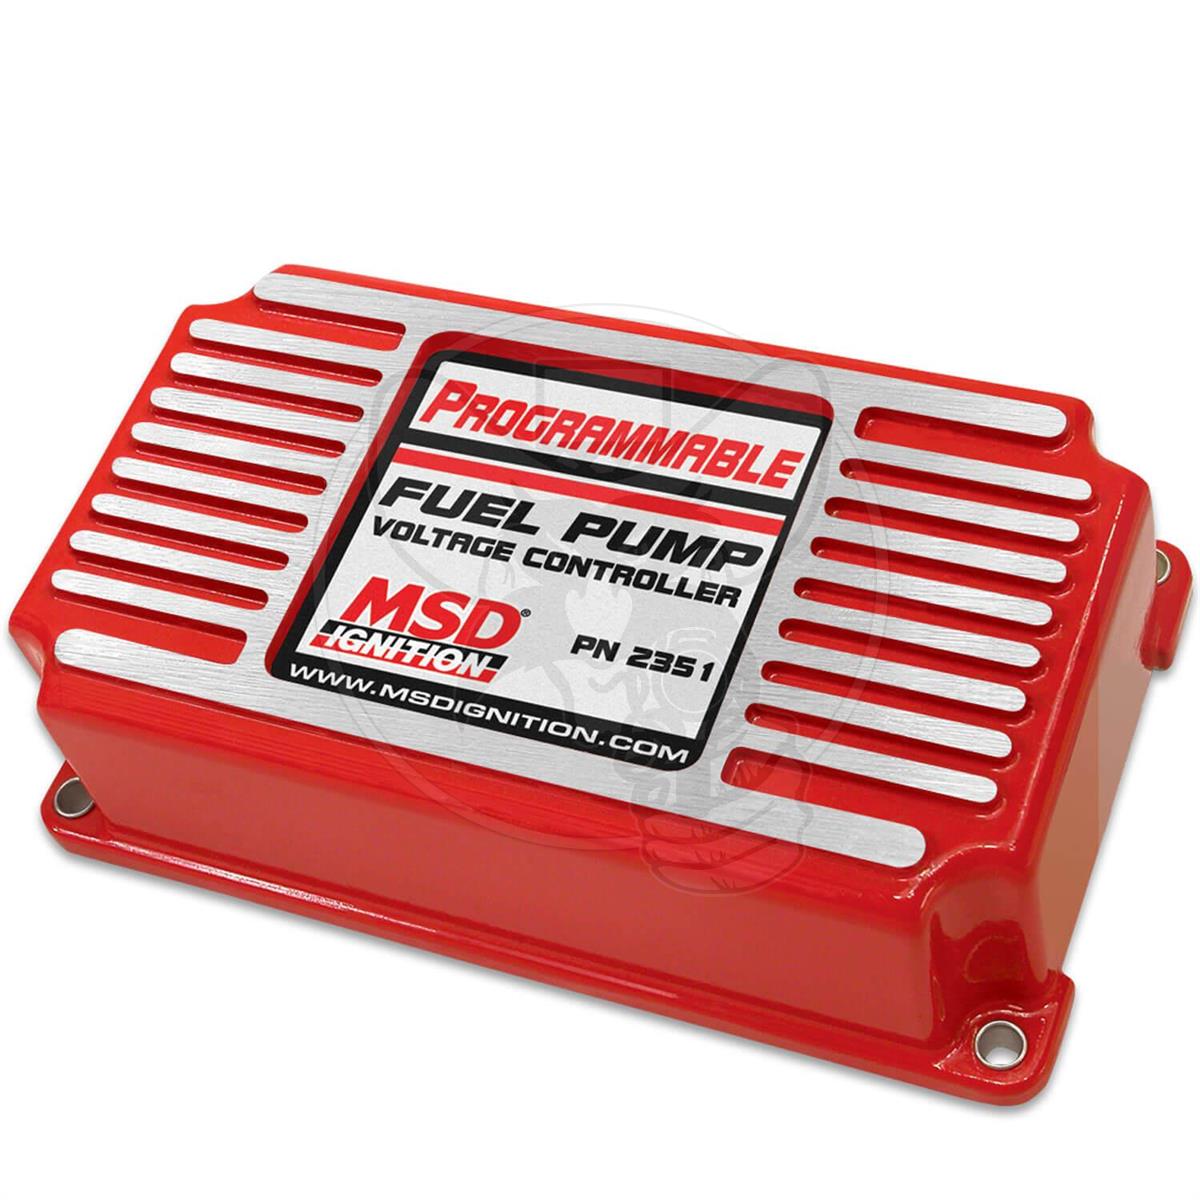 MSD FUEL PUMP VOLTAGE BOOSTER PROGRAMMABLE FOR TURBO/SUPERCHARGER